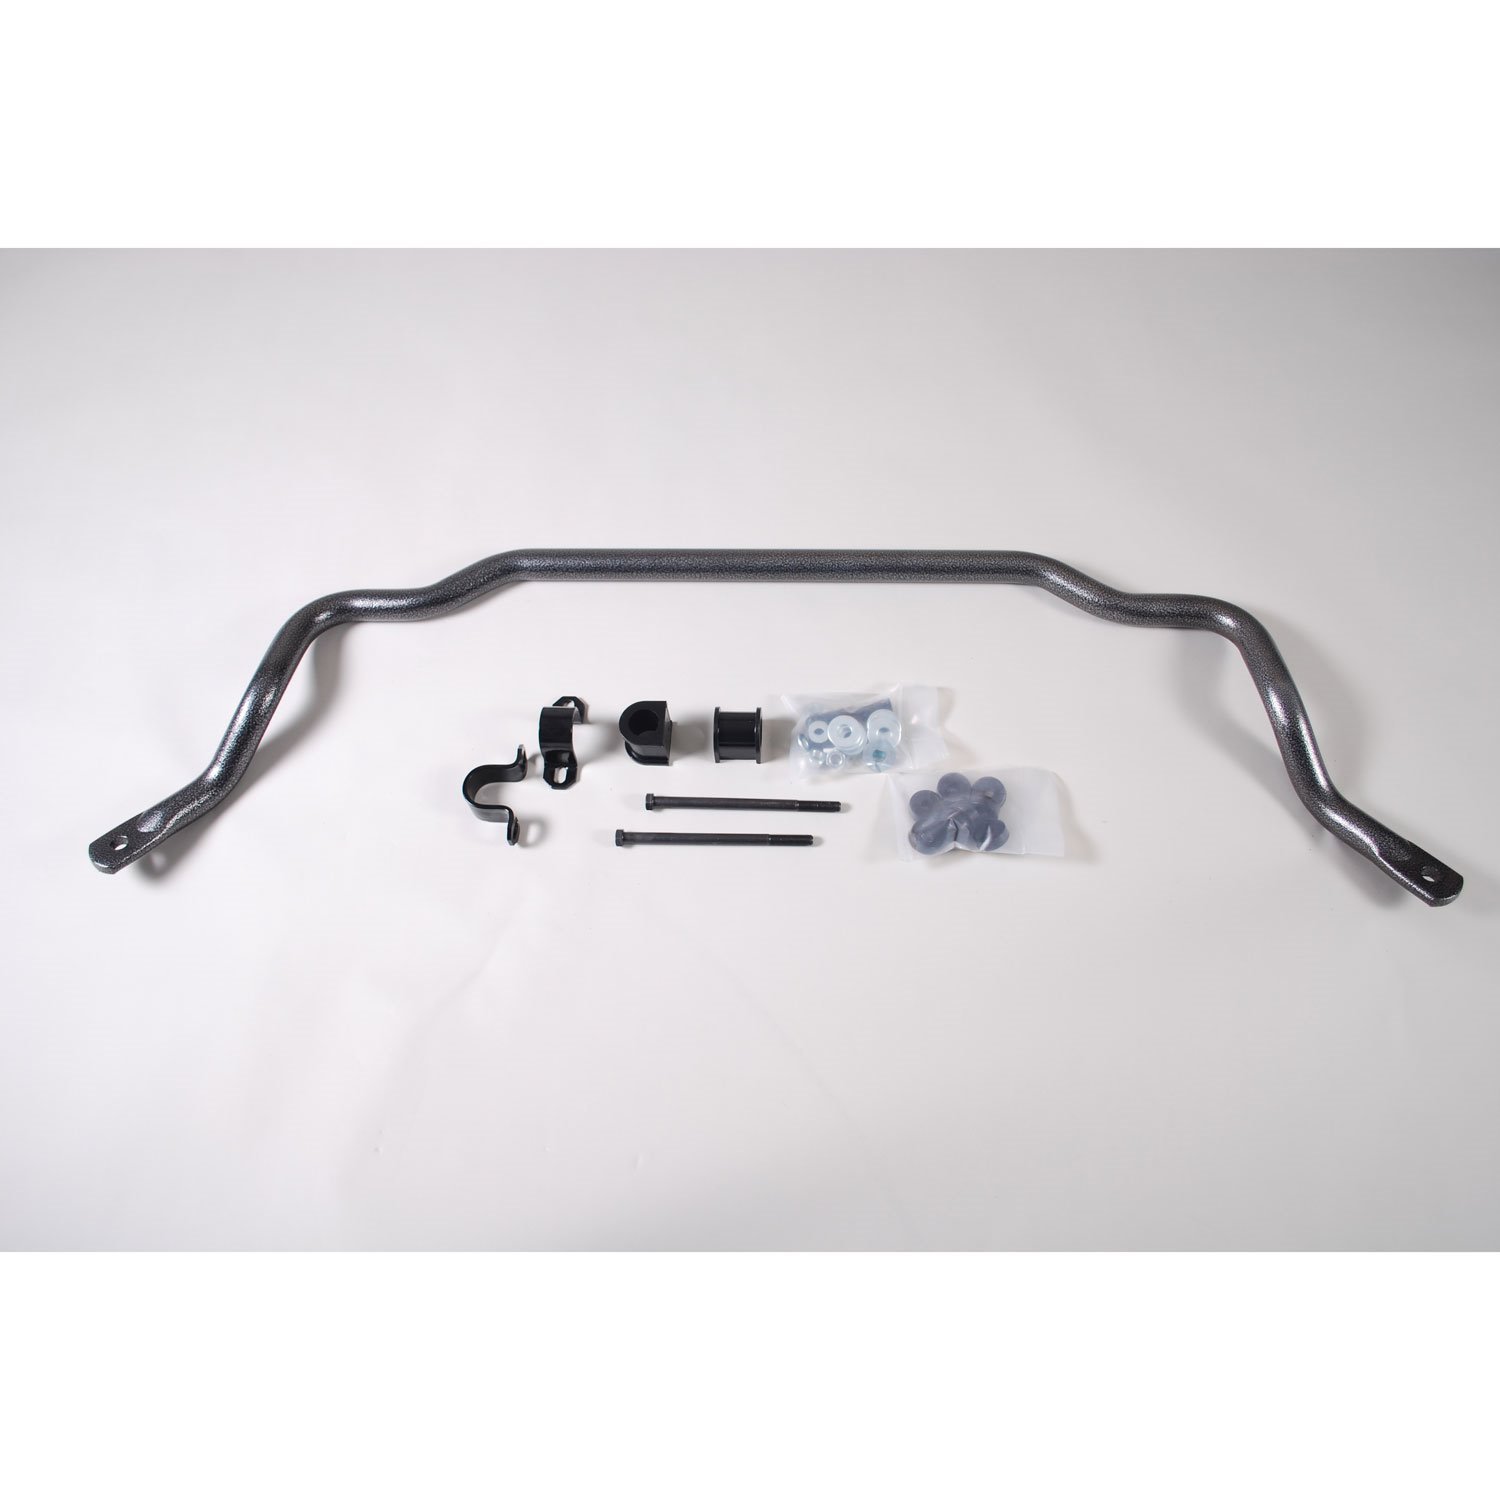 Front Sway Bar for 2003-2015 Chevy/GMC Express/Savana G2500/G3500 over 8500 GVW